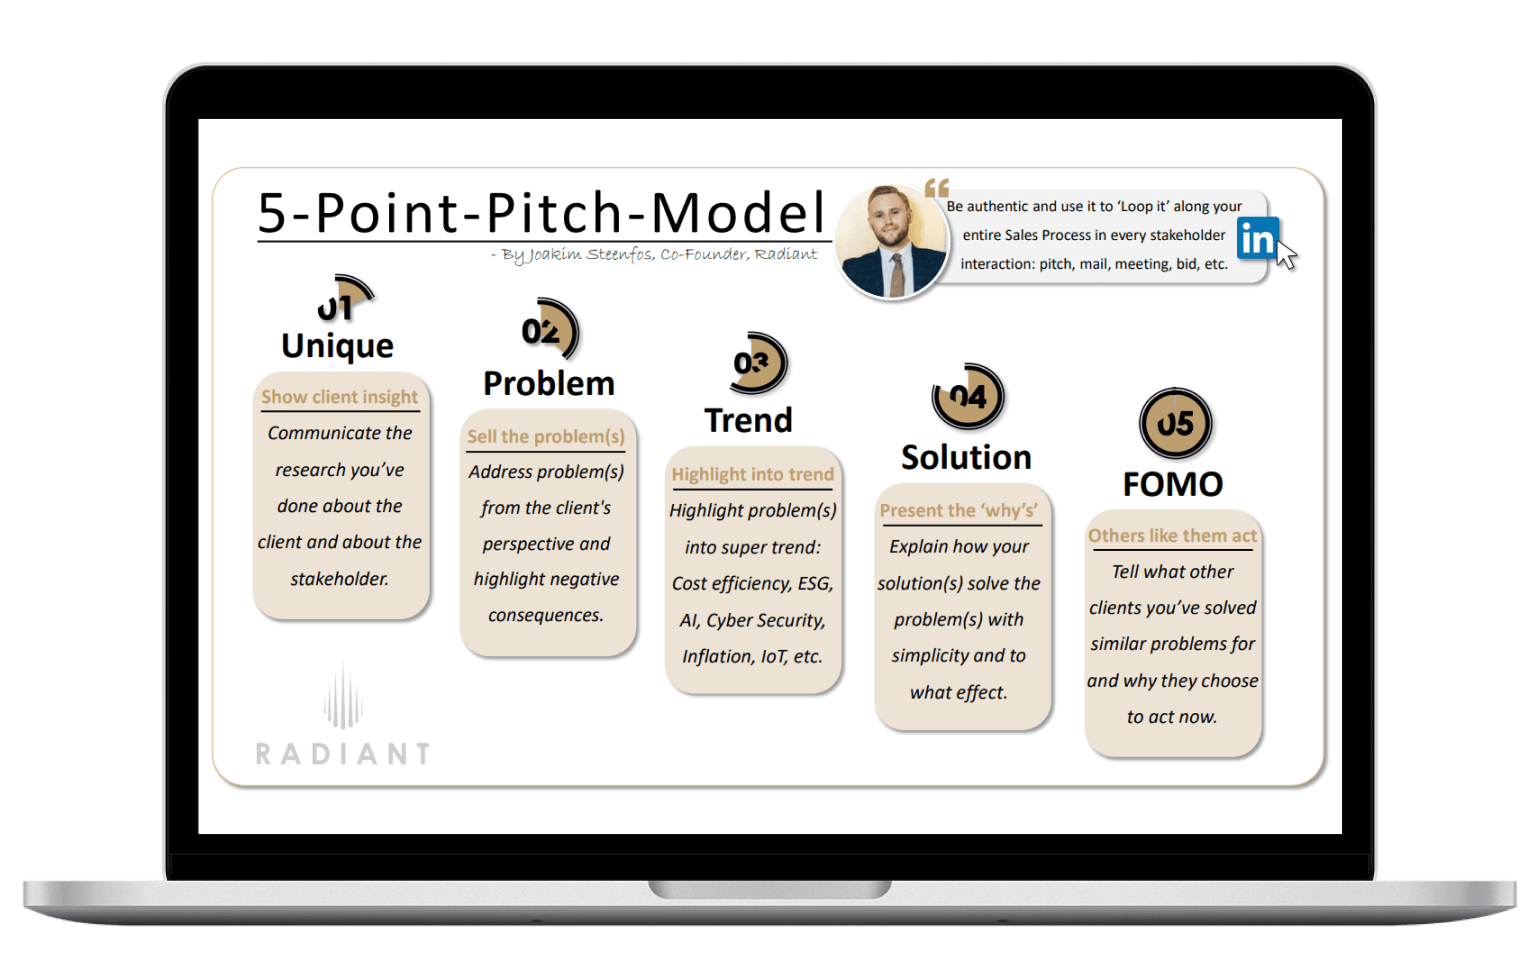 5-Point-Pitch-Model